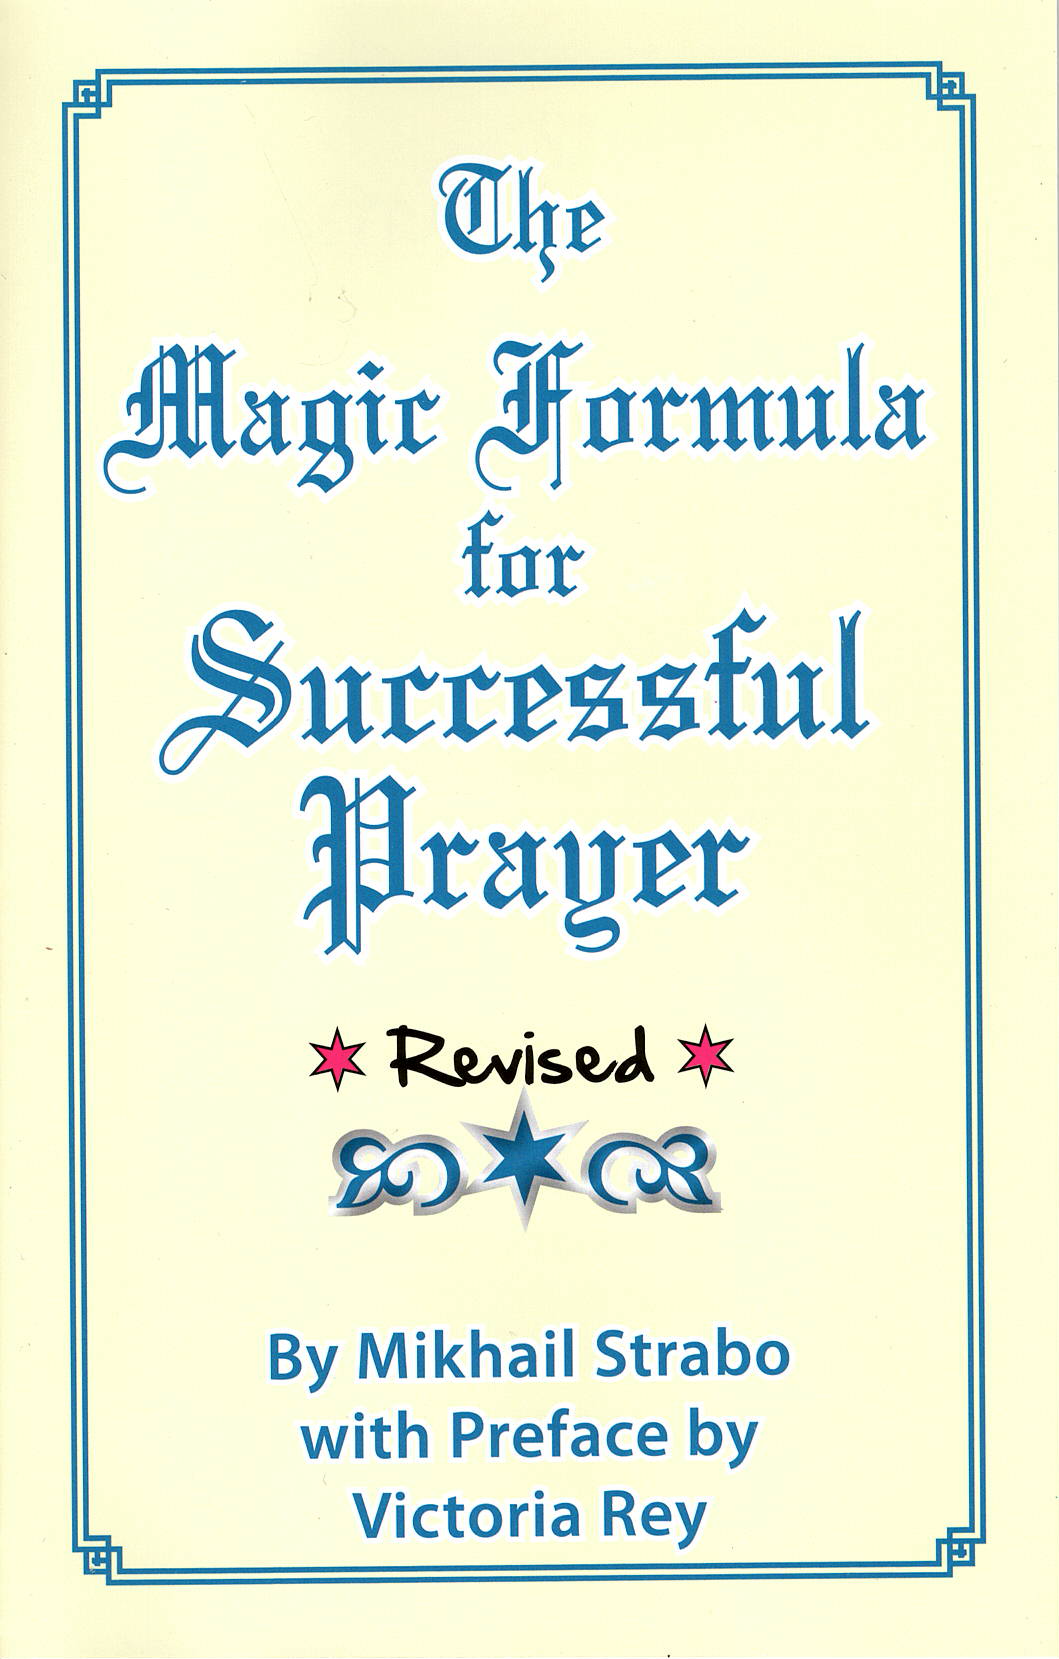 The Magic Formula for Successful Prayer, by Mikhail Strabo